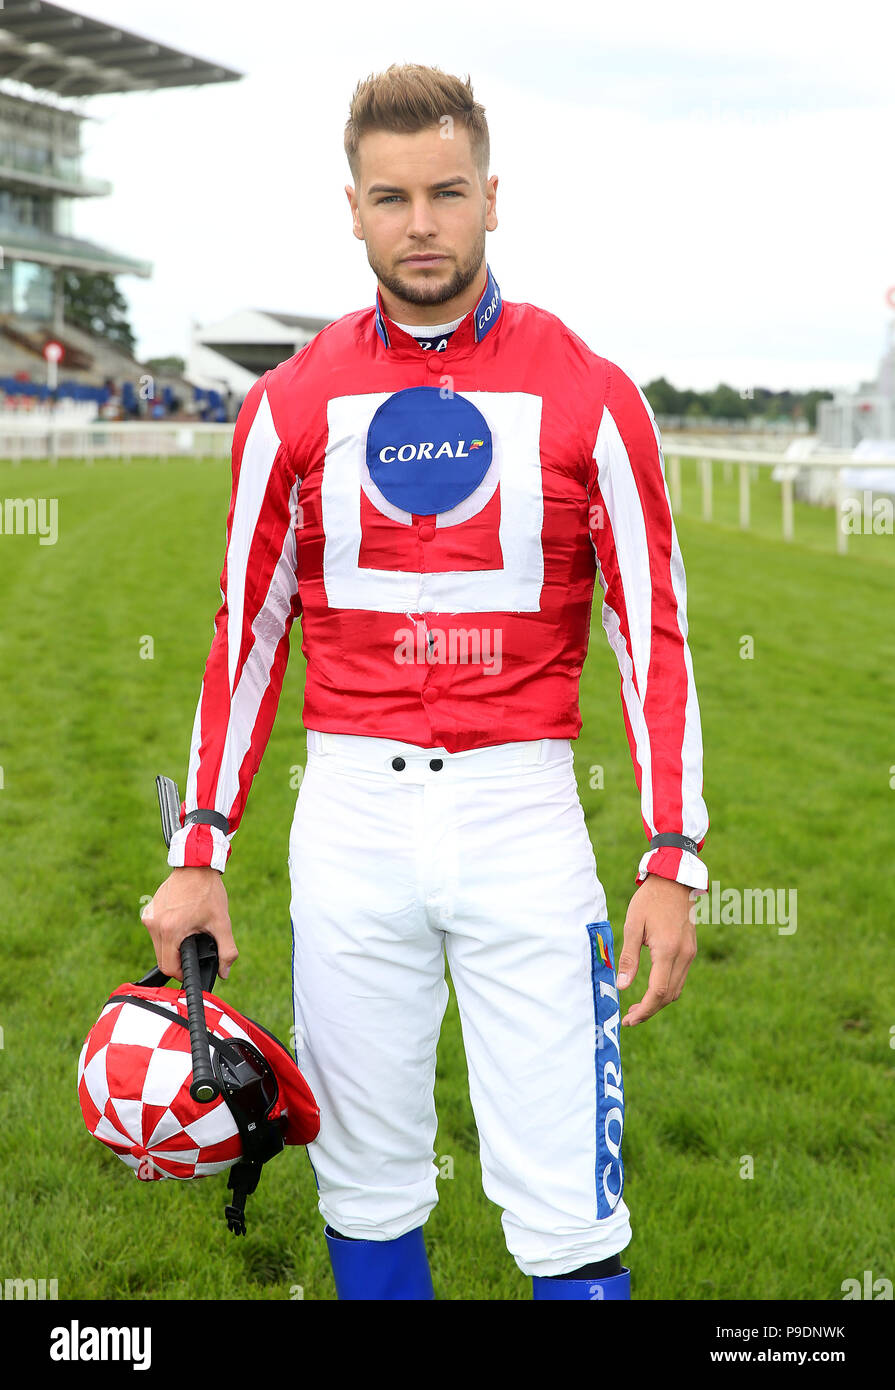 Love Island star Chris Hughes makes his debut as a jockey in a charity race at York today. Hughes, who is Coral’s #LoveRacing ambassador has trained intensely for the last five months with Jonjo O’Neill and will ride Carnageo over one mile and one furlong.LOVE ISLAND’S CHRIS HUGHES 3-1 FAVOURITE TO WIN HORSE RACE   The former Love Island star is well-known as a horse-racing fan and has swapped the suntan lotion for the saddle, having trained intensely for the last five months in partnership with Coral, the bookmakers. The bookies have him down as the 3-1 favourite to win.  The reality TV star  Stock Photo